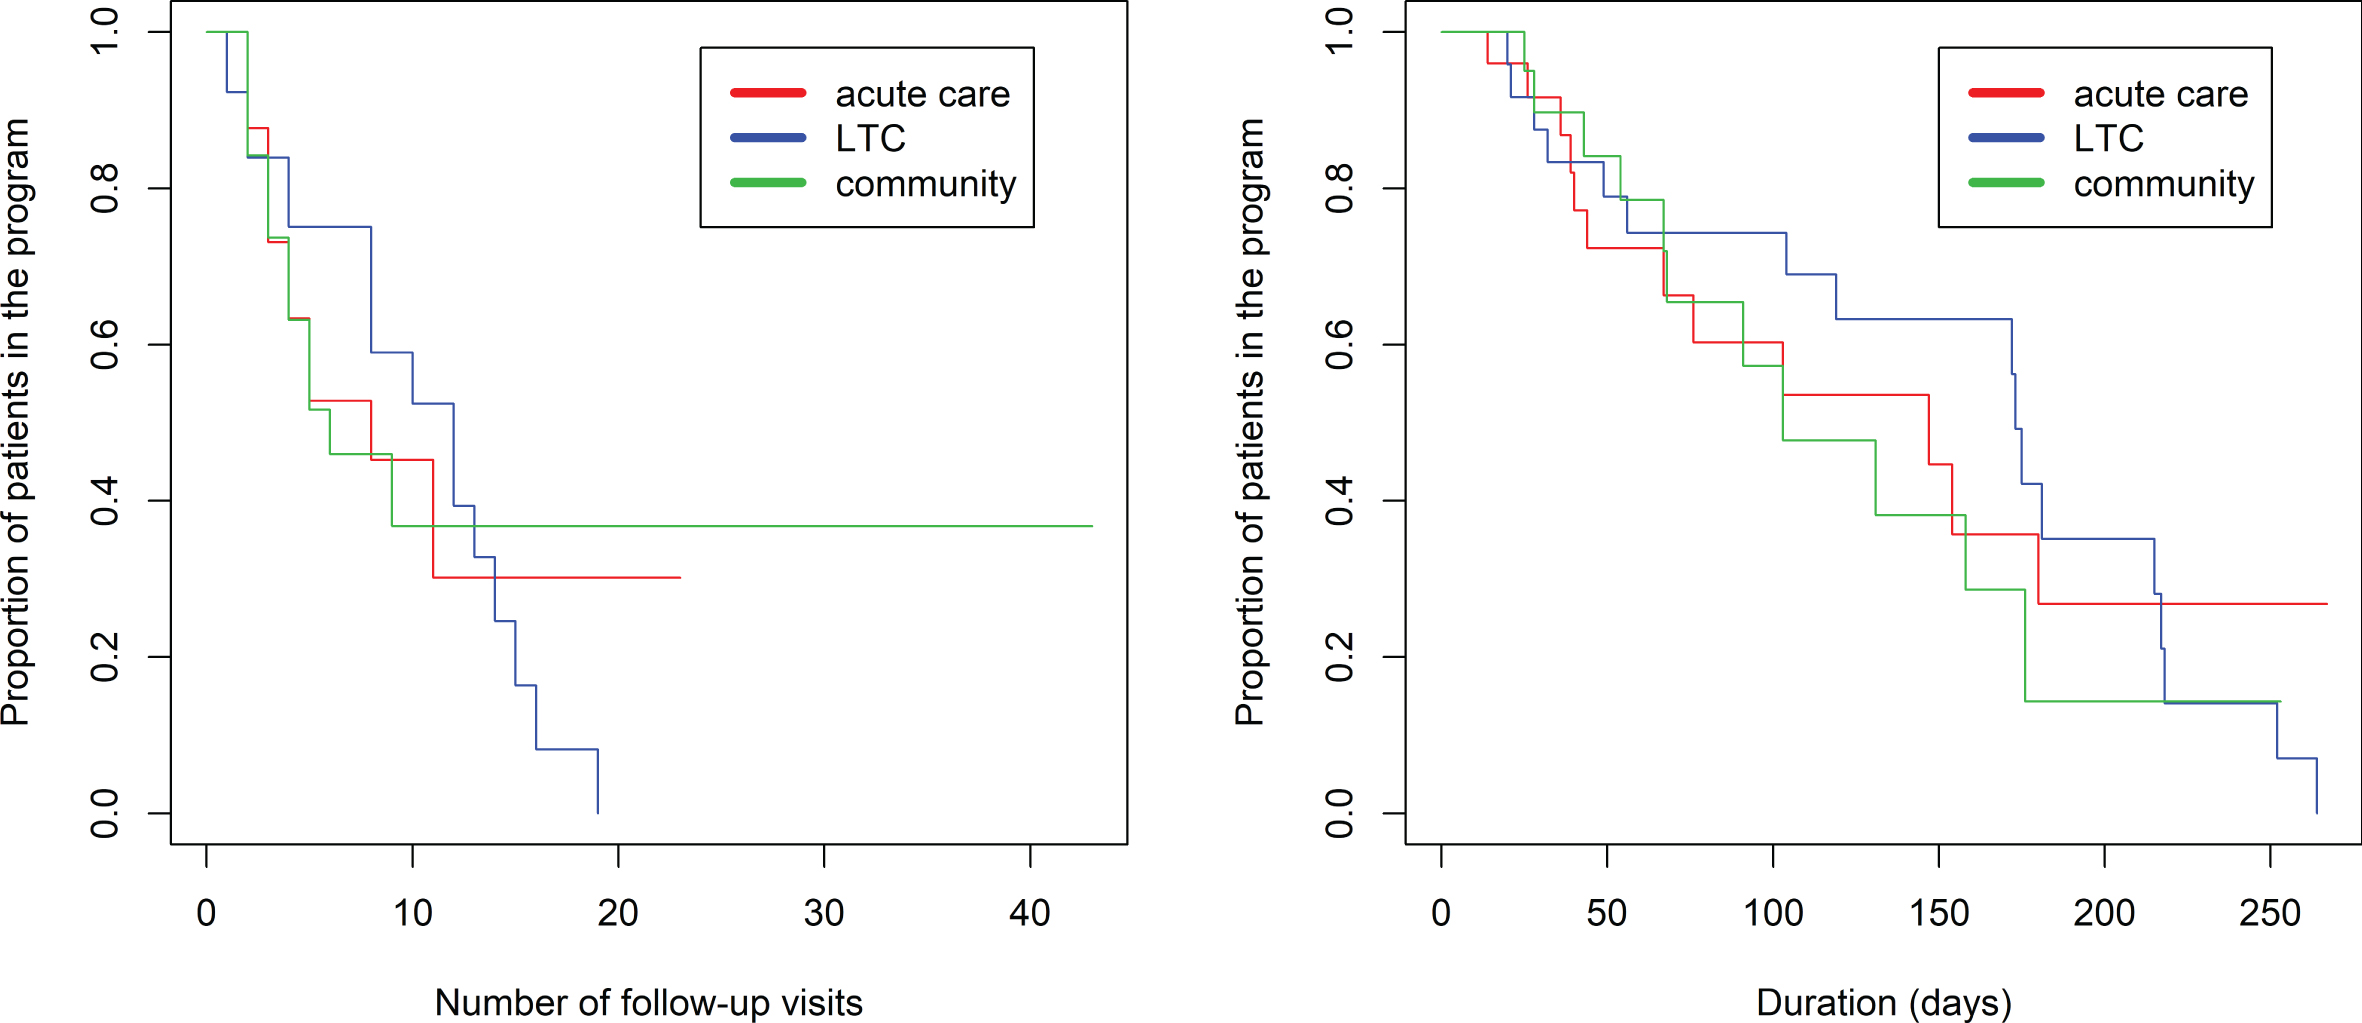 Kaplan-Meier estimated “survival” plot showing proportion of patients referred from acute care, LTC, and the community who are still in the program (rating 1 to 6) based on number of visits and duration in VBM.